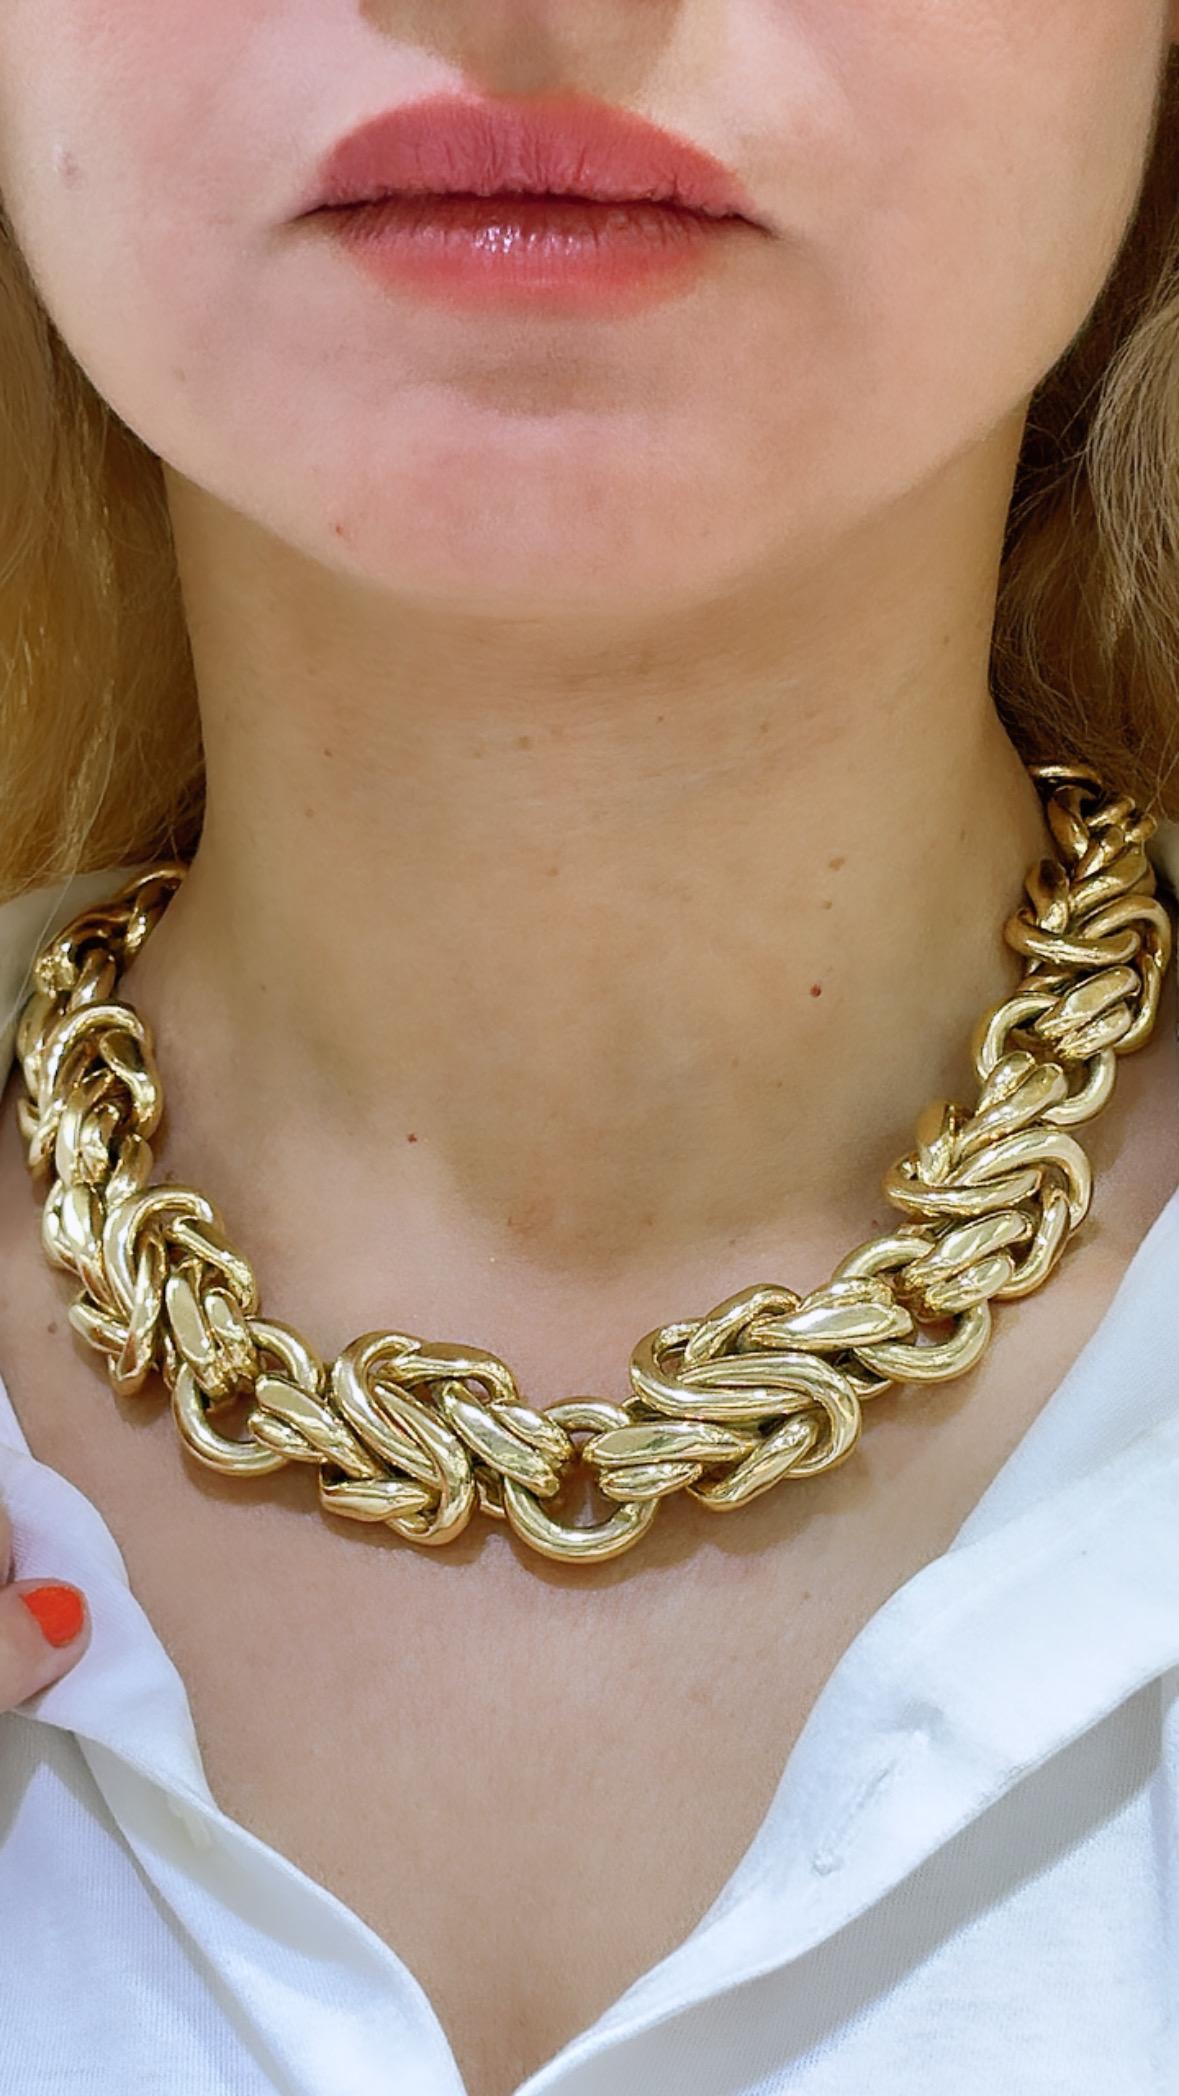 Hand Woven 227GR 18K Yellow Gold Statement Necklace

Metal: 18K Yellow Gold

Gold Weight: 227GR 

Lenght: 18